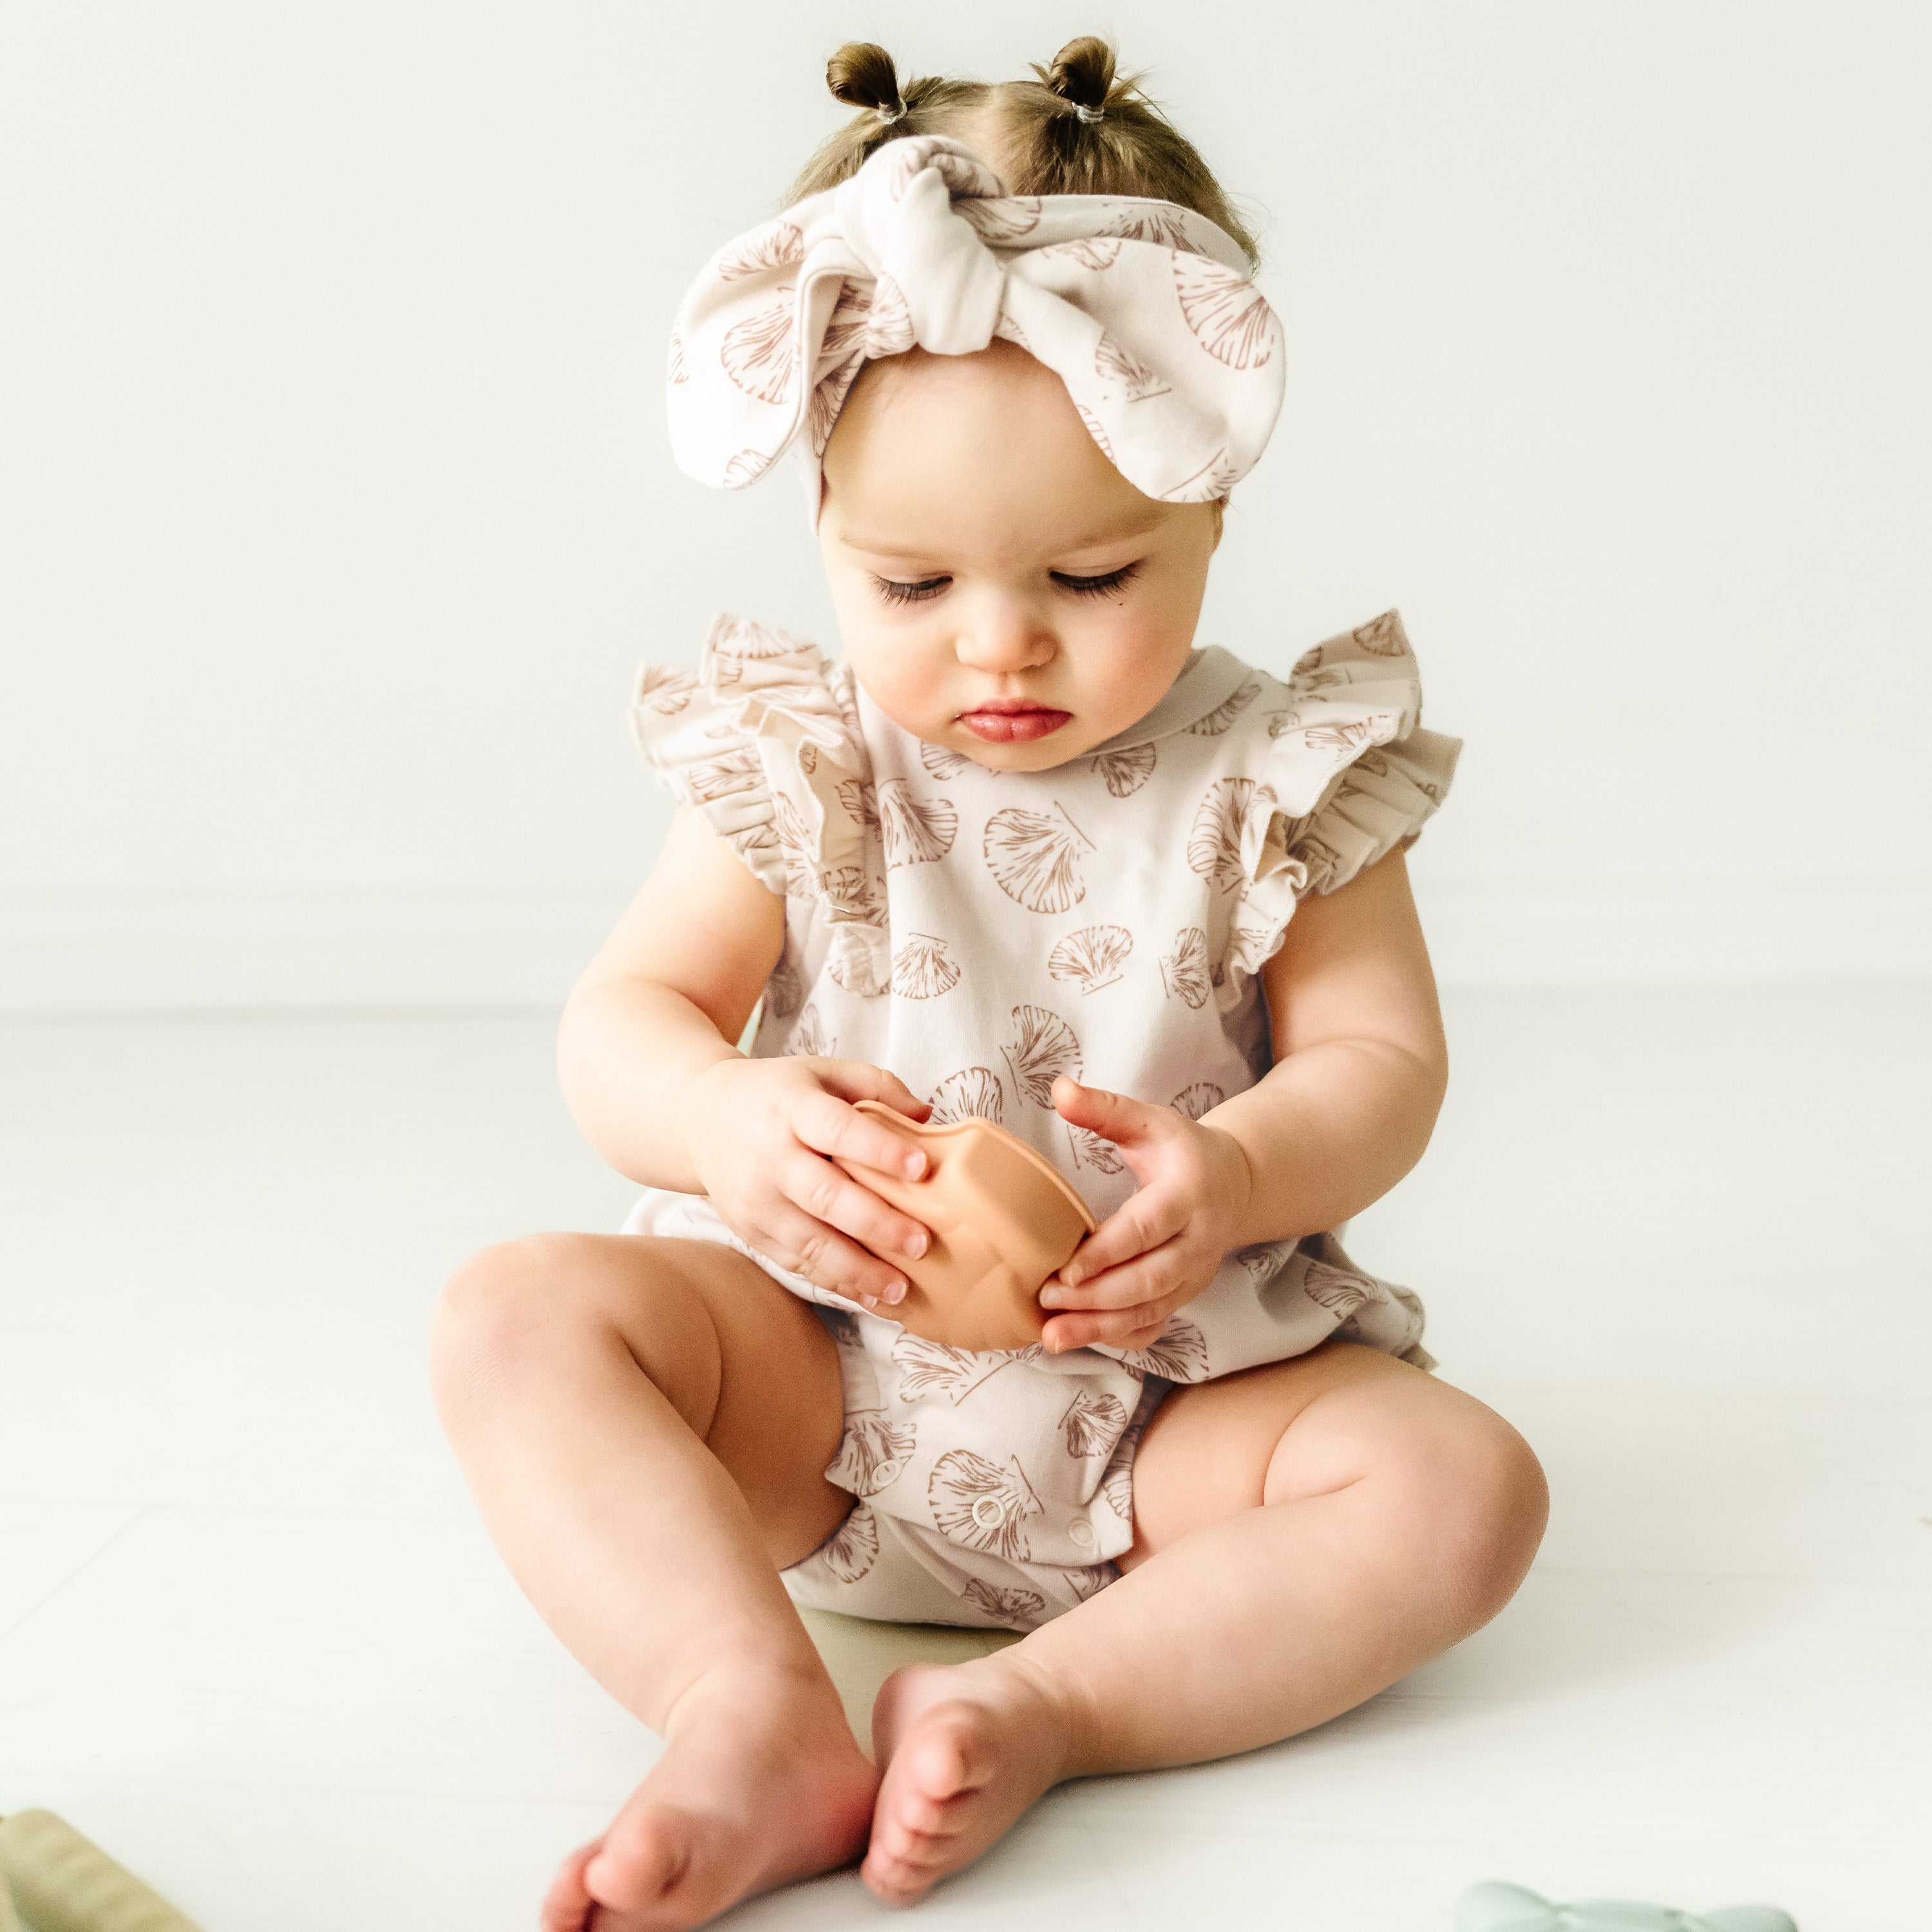 A toddler girl wearing a headband and ruffled outfit sits on the floor, examining an  Organic Flutter Bubble Onesie - Seashells in her hands, with a white background. (Makemake Organics)